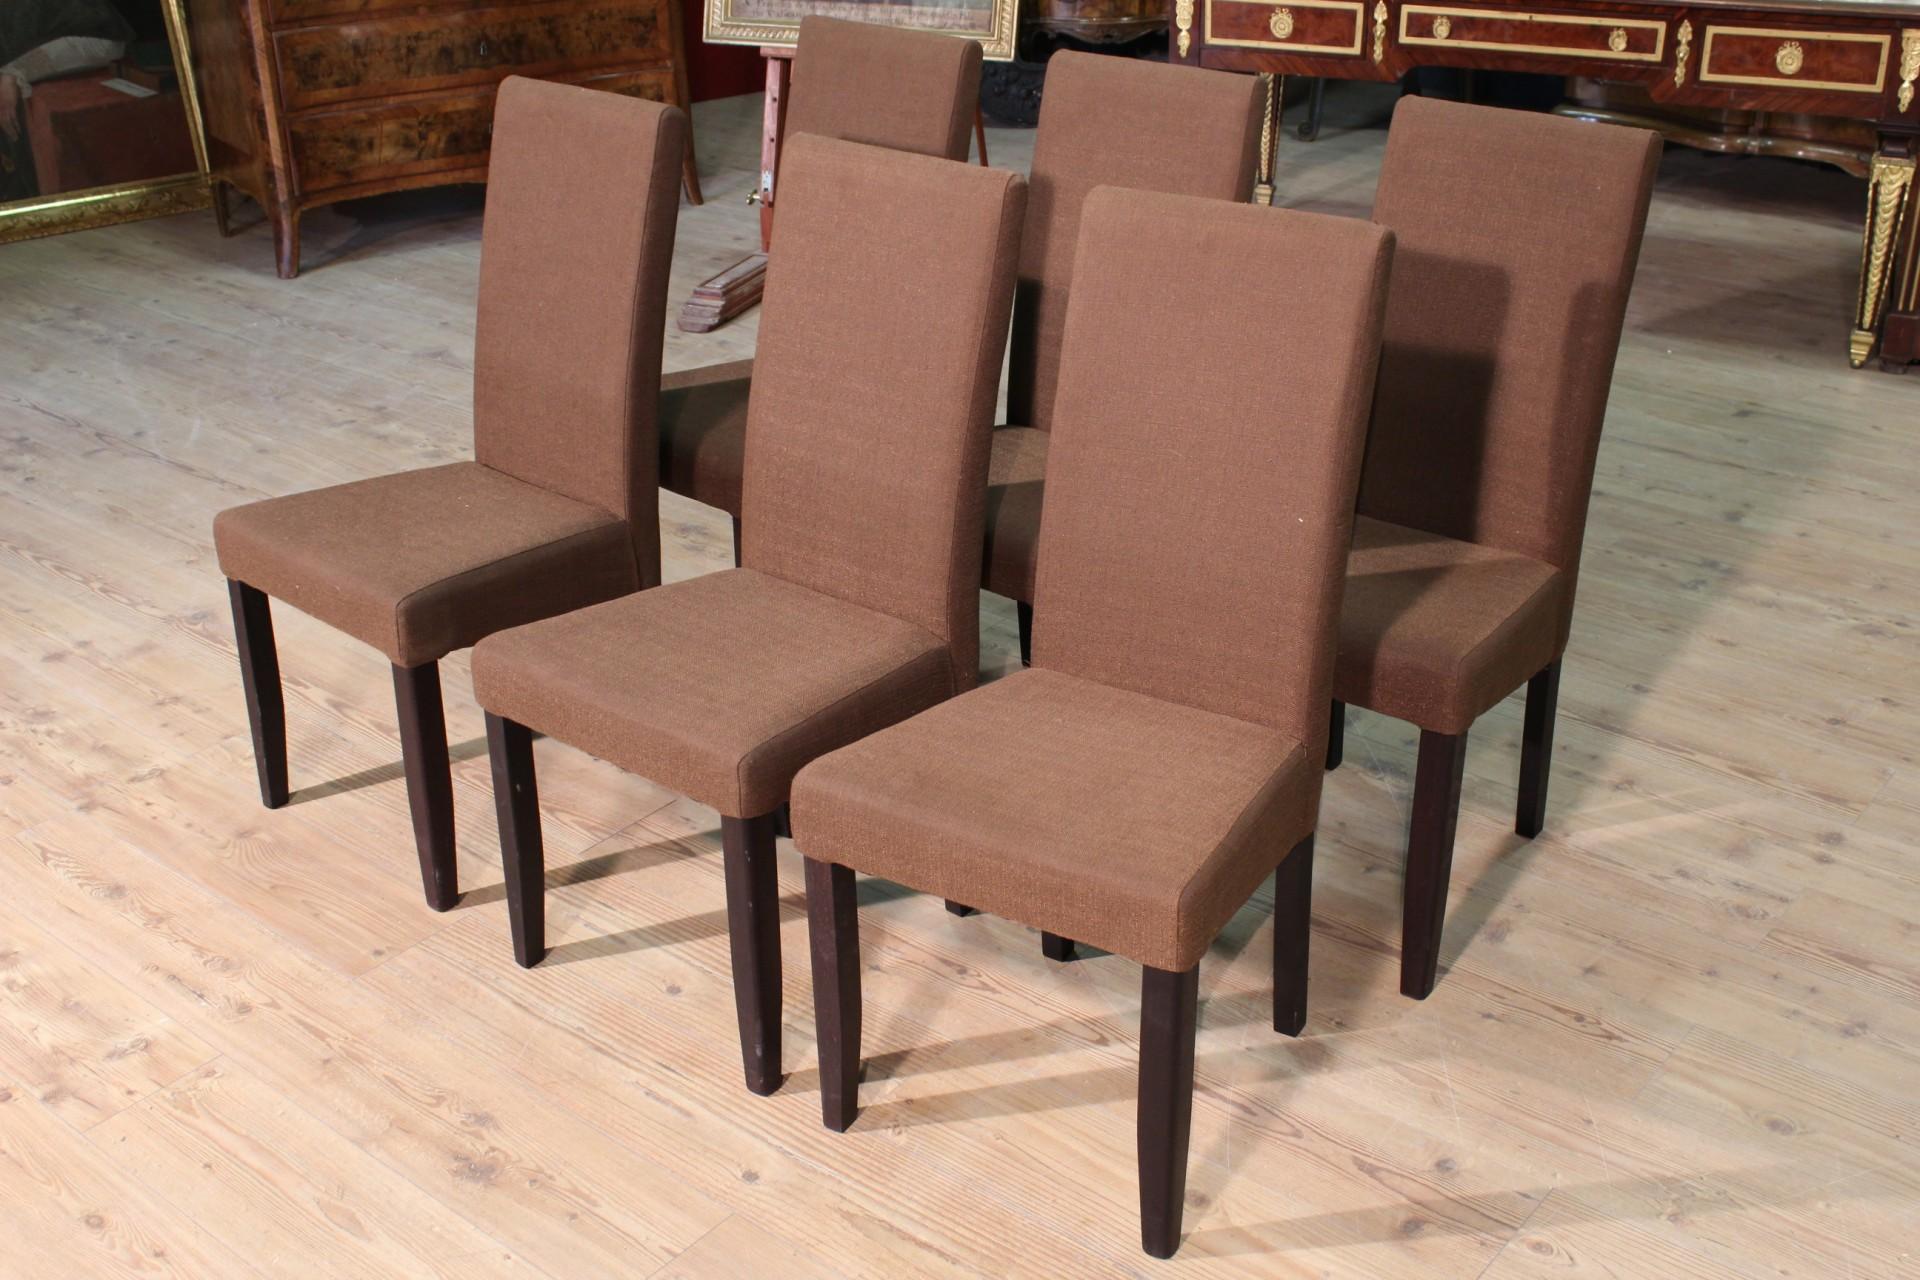 Group of 6 Chairs Covered in Fabric, 20th Century For Sale 1